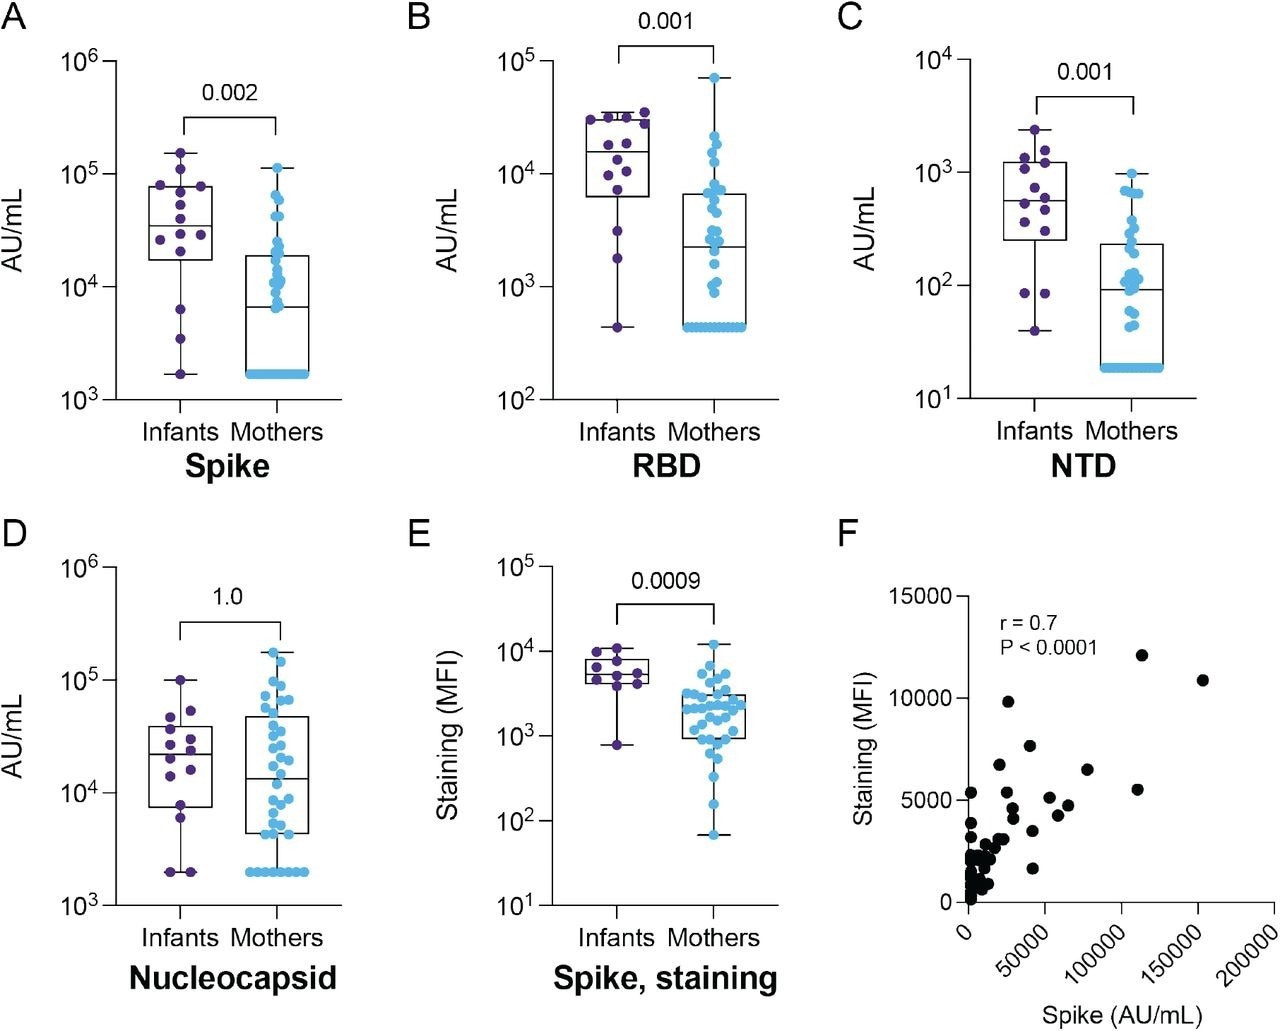 IgG binding to SARS-CoV-2 antigens and S-CEM cell surface staining in SARS-CoV-2-seropositive infants and mothers. IgG antibody binding titers to (A) full-length Spike, (B) RBD, (C) NTD and (D) nucleocapsid in convalescent plasma from infants (N = 14) and mothers (N = 35) measured by commercial multiplexed electrochemiluminescent assay (MSD). (E) Antibody binding to Spike expressed on the CEM cell surface in infants (N = 10) and mothers (N = 35). The Spike staining was repeated in triplicate. (F) Spearman correlation coefficient and p-value calculated for Spike IgG binding by MSD assay versus S-CEM cell surface staining. P-values are indicated above comparisons. Two-tailed Wilcoxon rank sum test was used for all comparisons. MFI: mean fluorescence intensity.